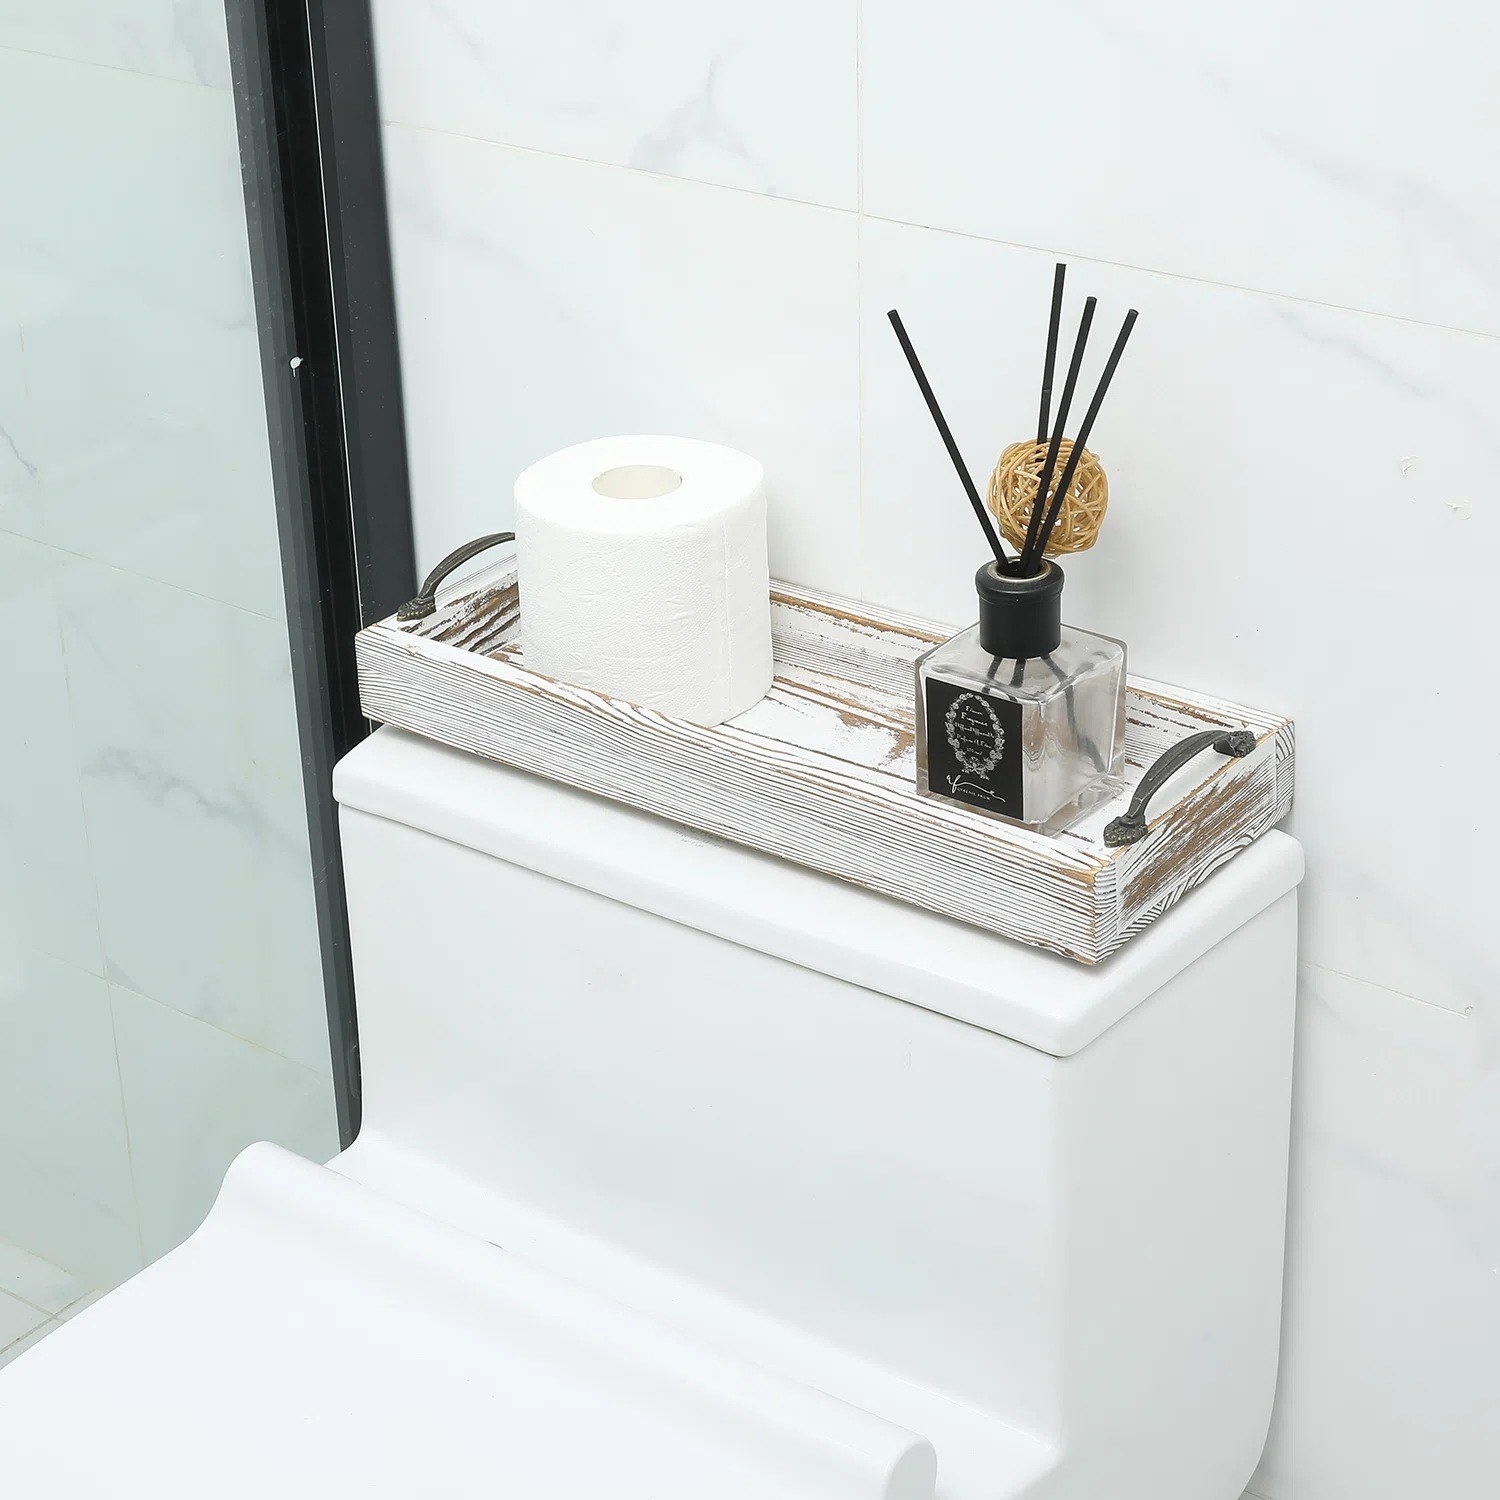 the tray holding toilet paper and a diffuser on the back of a toilet